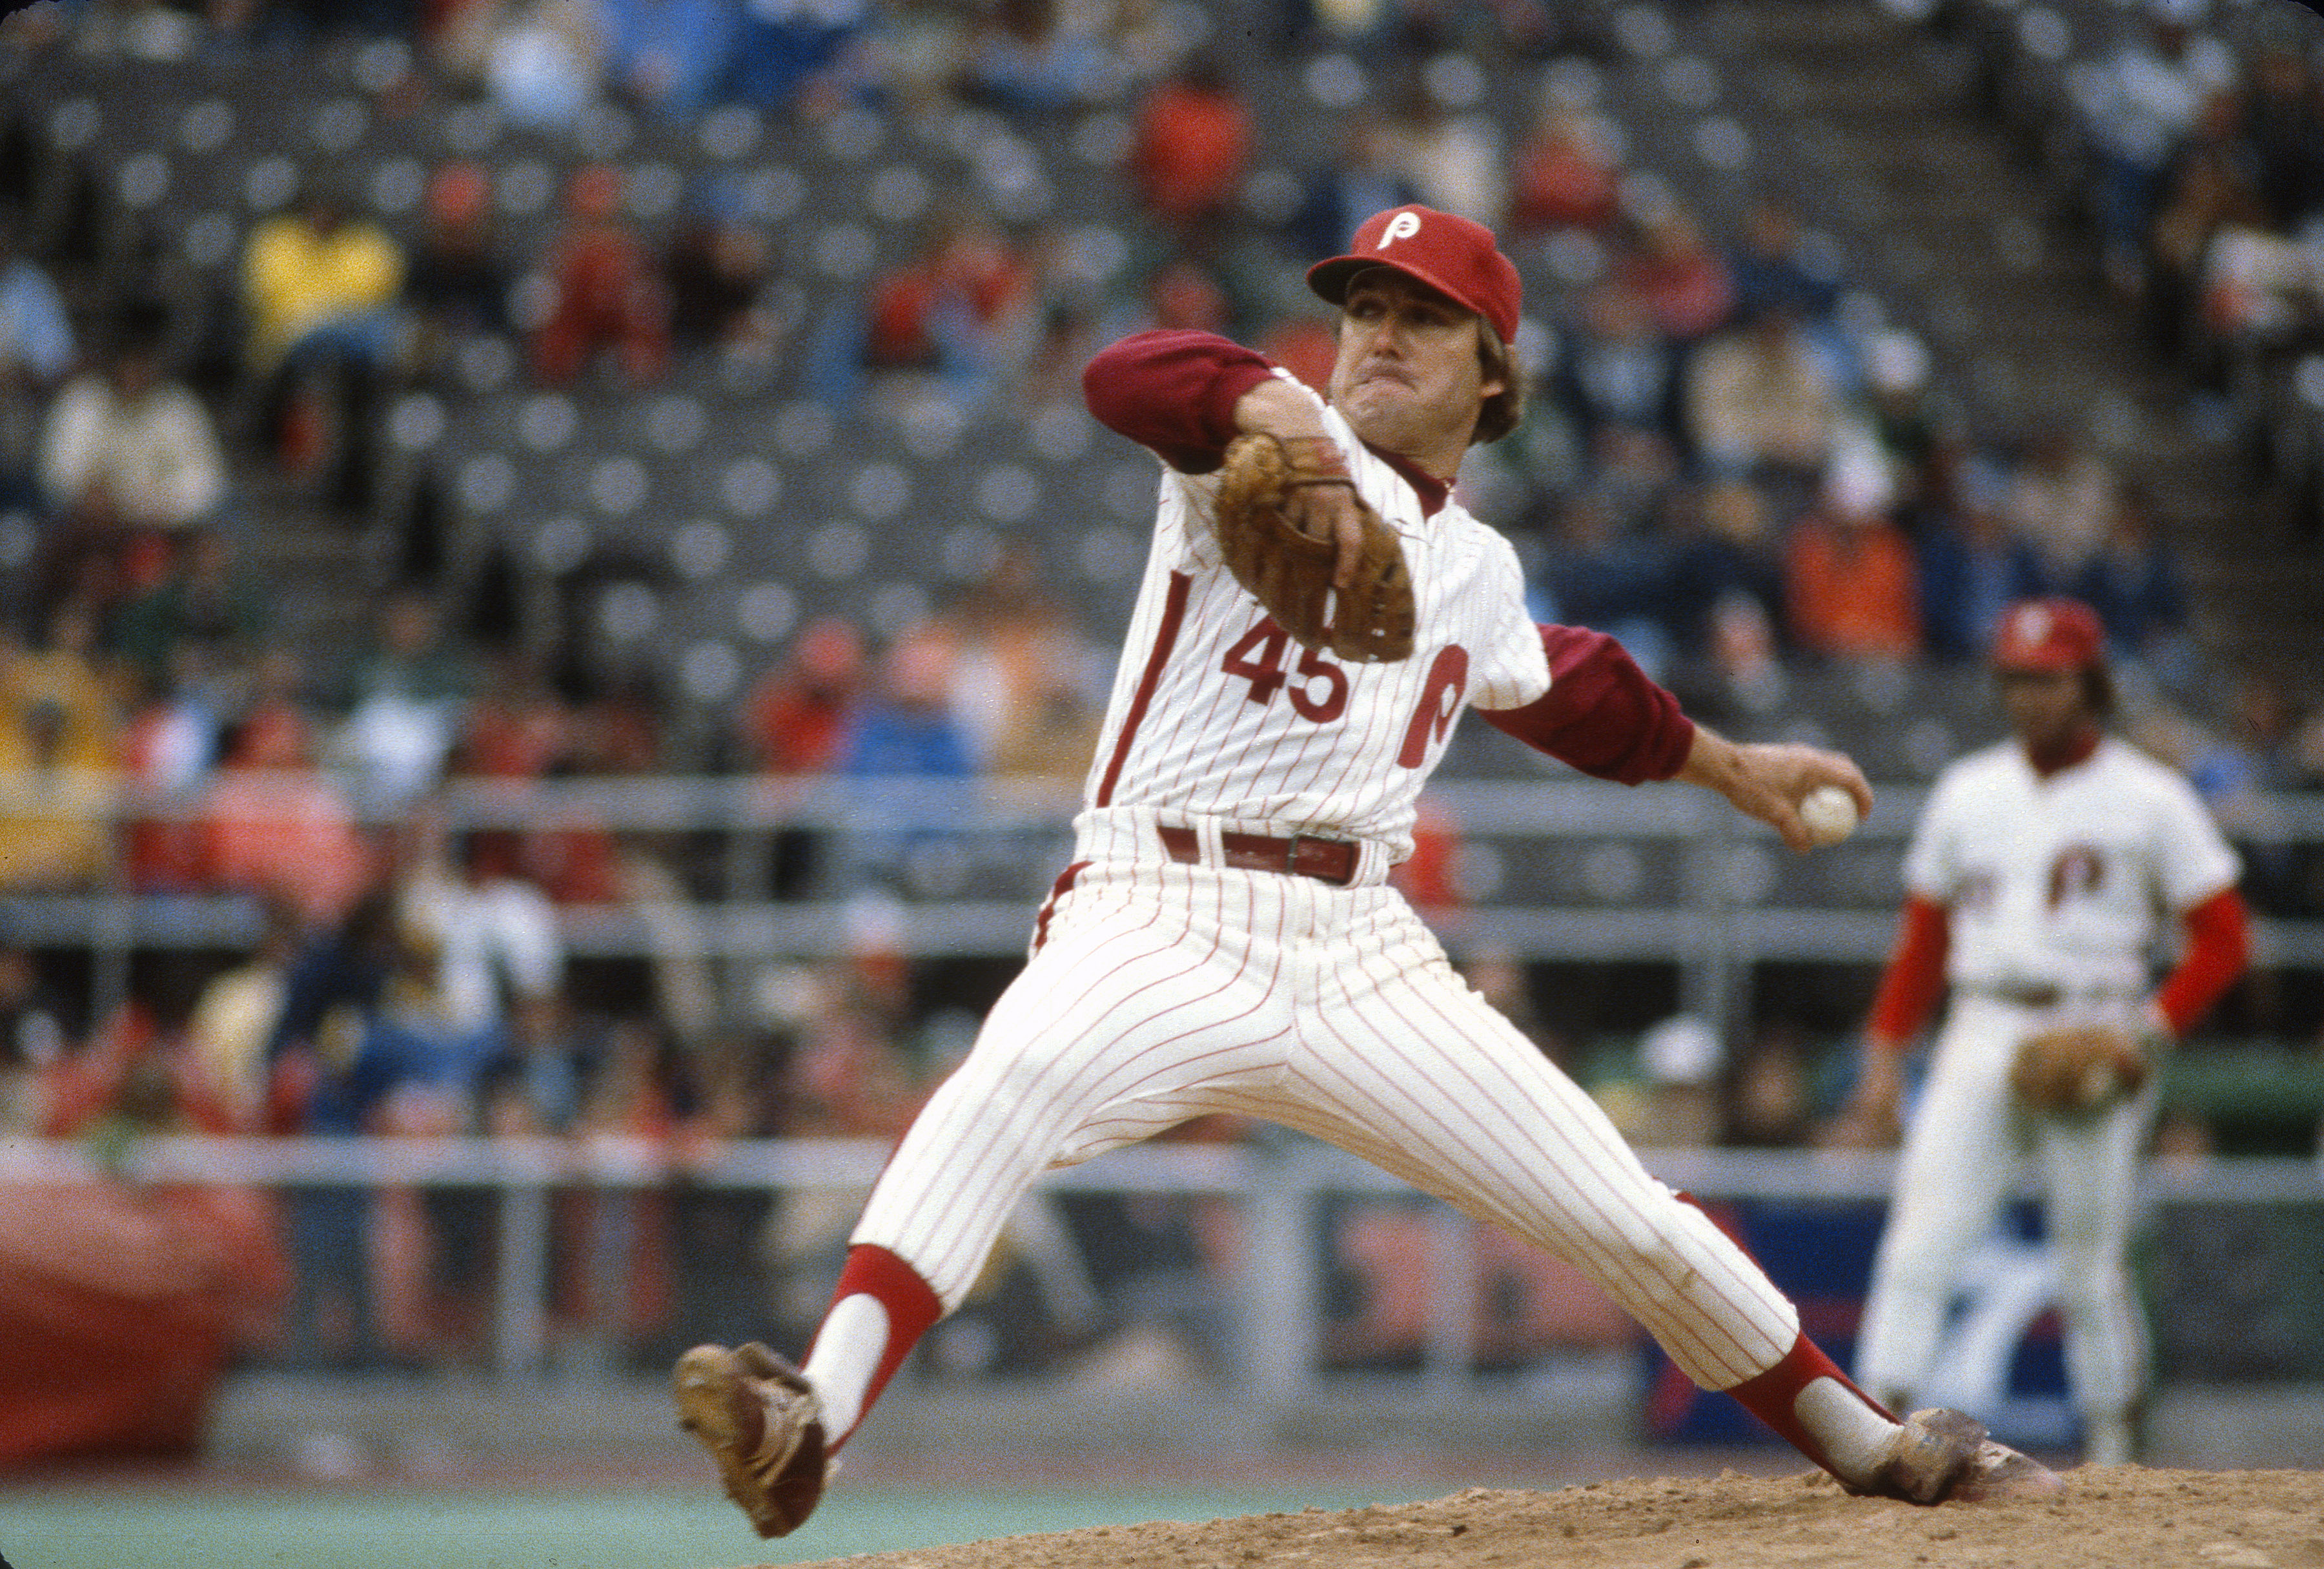 Pitcher Tug McGraw #45 of the Philadelphia Phillies pitches during an Major League Baseball game circa 1978 at Veterans Stadium in Philadelphia, Pennsylvania. | Source: Getty Images